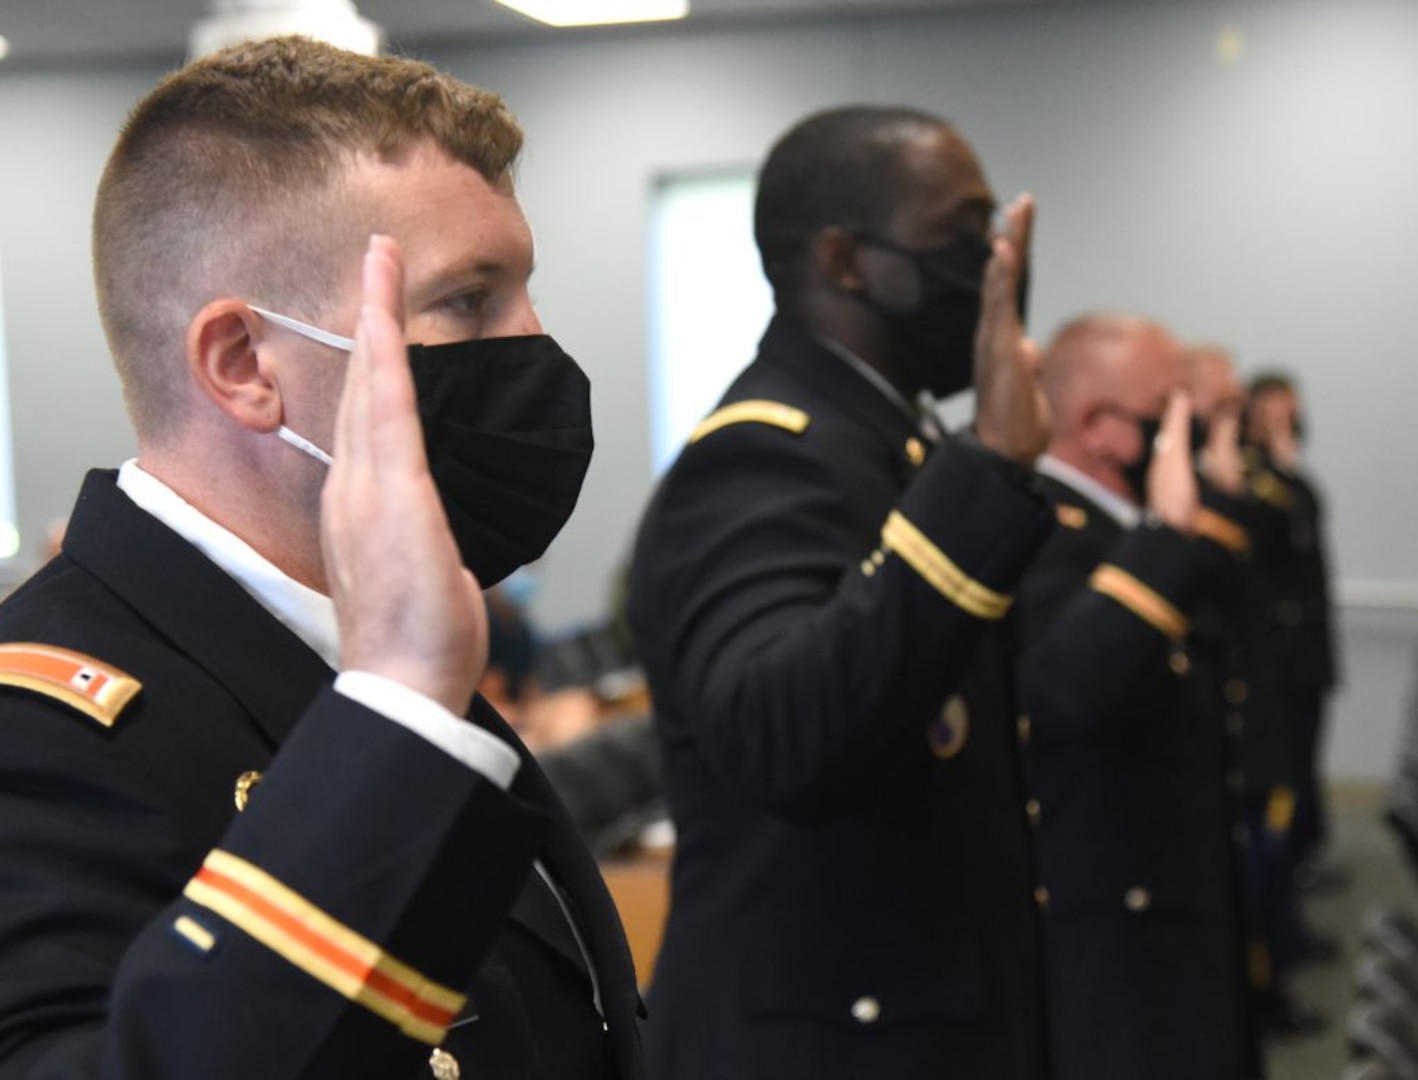 Virginia National Guard and U.S. Army Reserve candidates swear in as new warrant officers during a graduation ceremony at the conclusion of Warrant Officer Candidate School